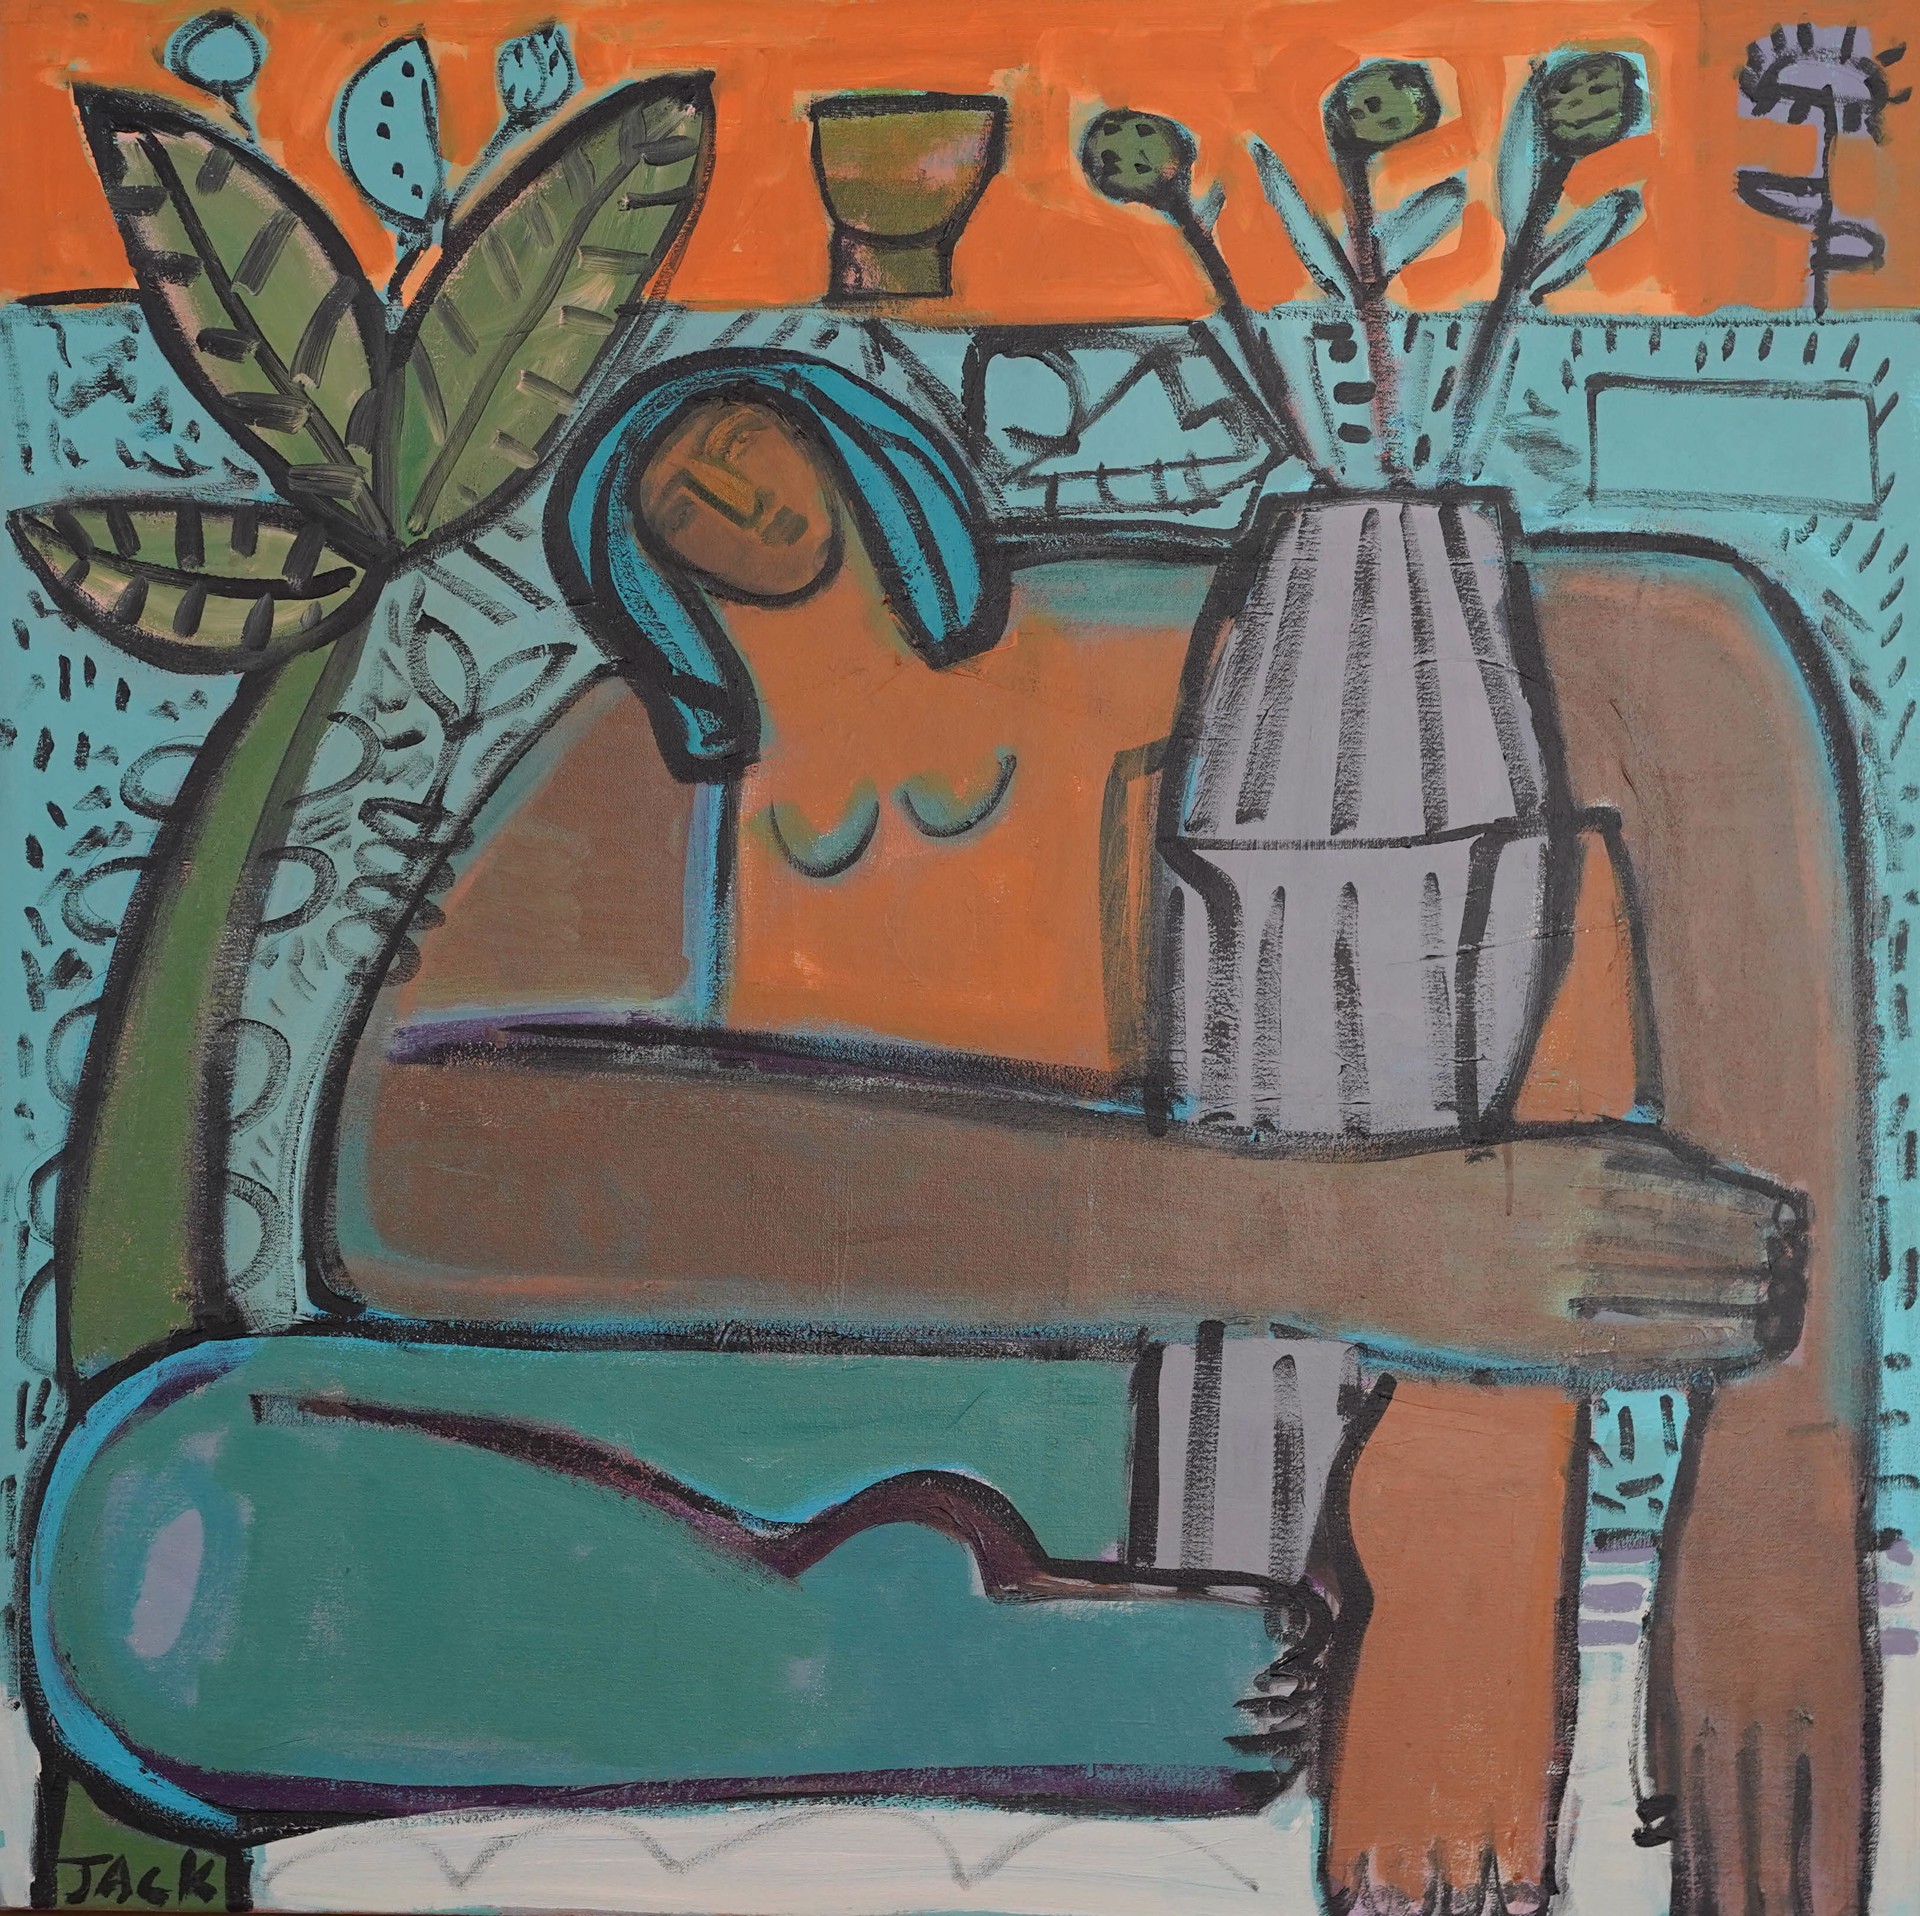 Woman with Plants by Rebecca Jack